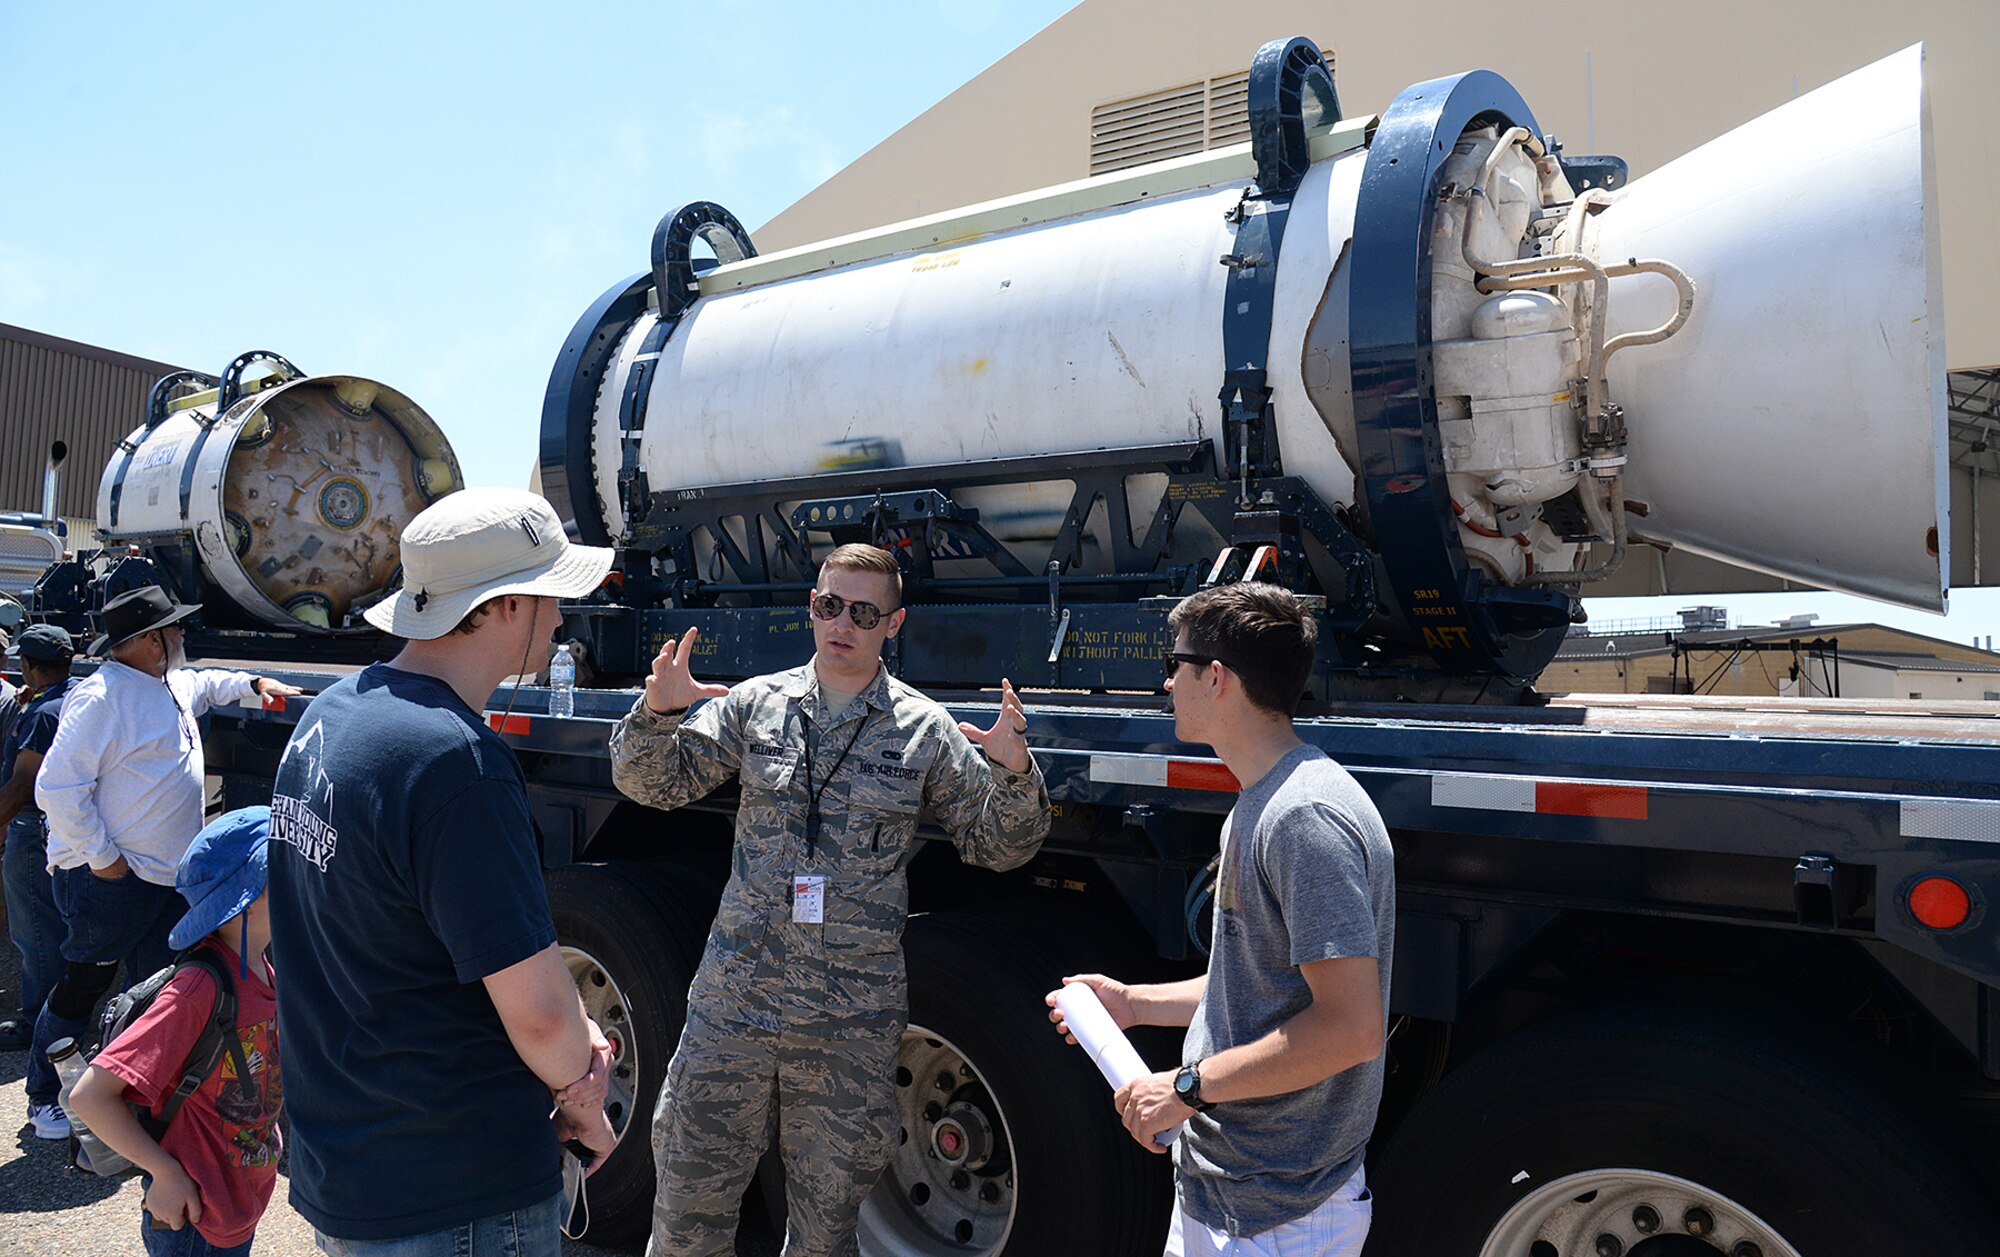 Staff Sgt. Cote Welliver, 581st Missile Maintenance Squadron, answers questions about Minuteman III Intercontinental Ballistic Missile solid fuel rocket motors during the Warriors Over the Wasatch Air and Space Show June 23, 2018, at Hill Air Force Base, Utah. The motors were part of the Ogden Air Logistics Complex's statics on display at the show. (U.S. Air Force photo by Alex R. Lloyd)